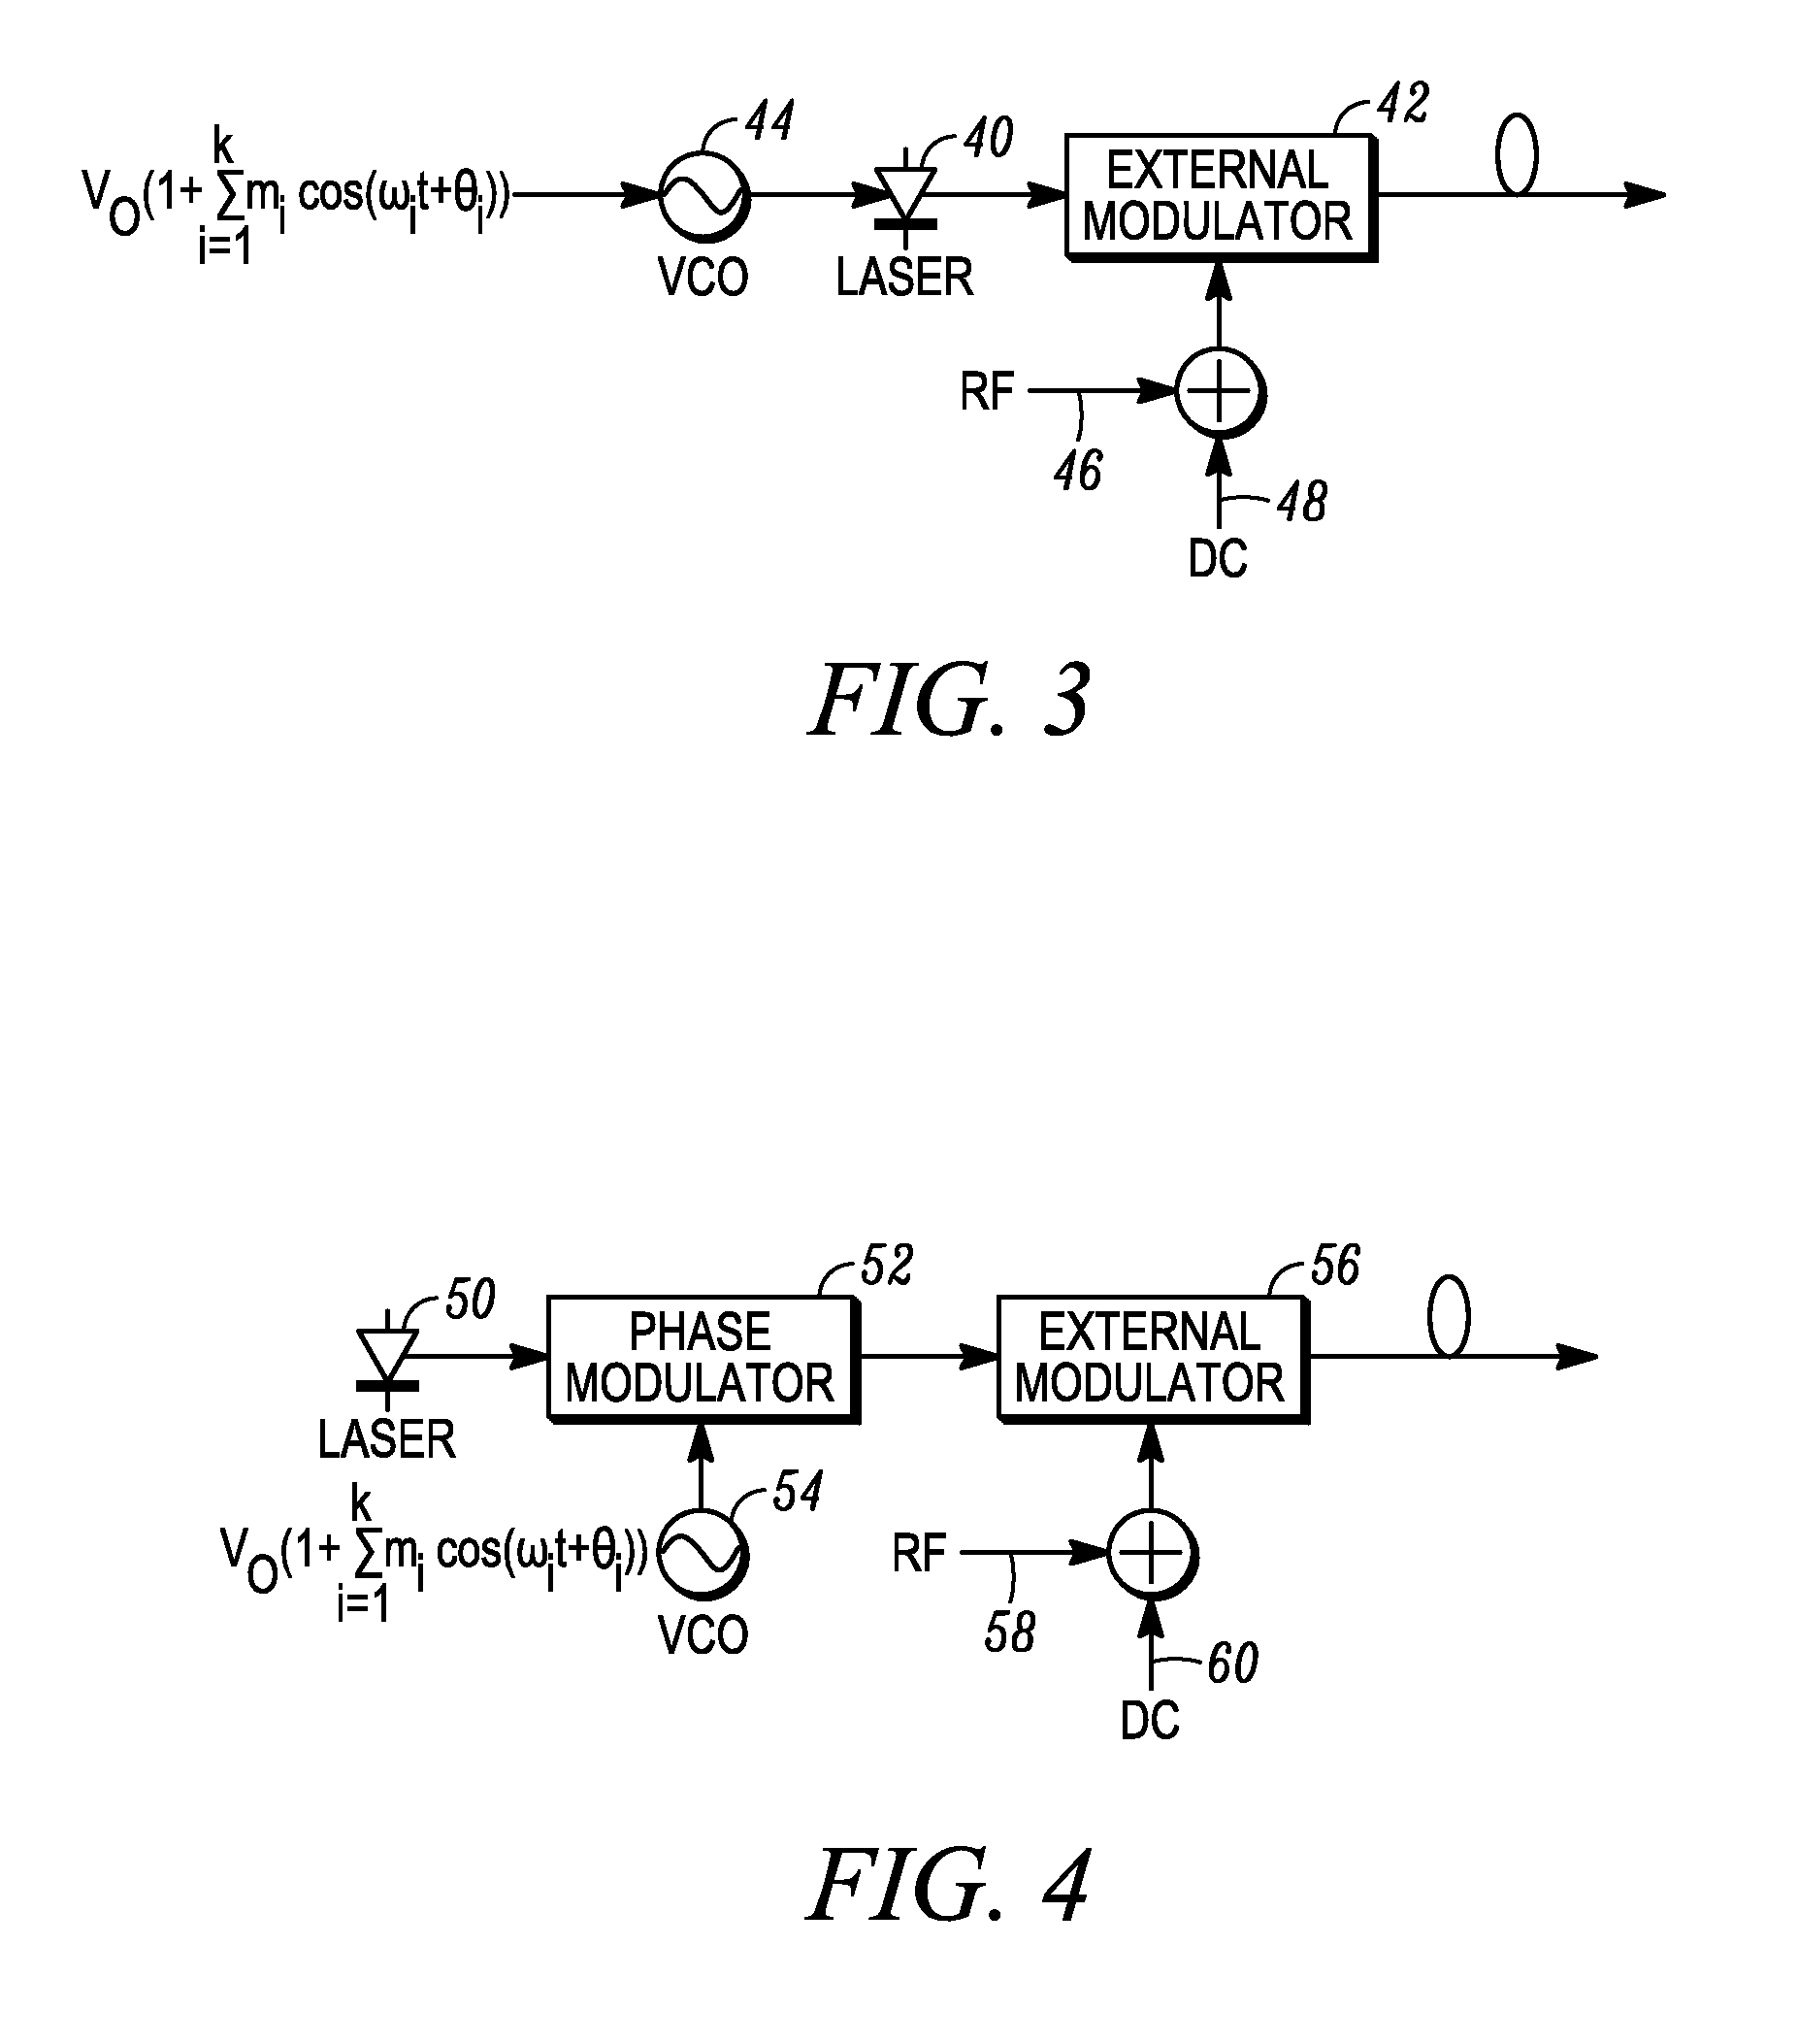 Method and apparatus for improved SBS suppression in optical fiber communication systems